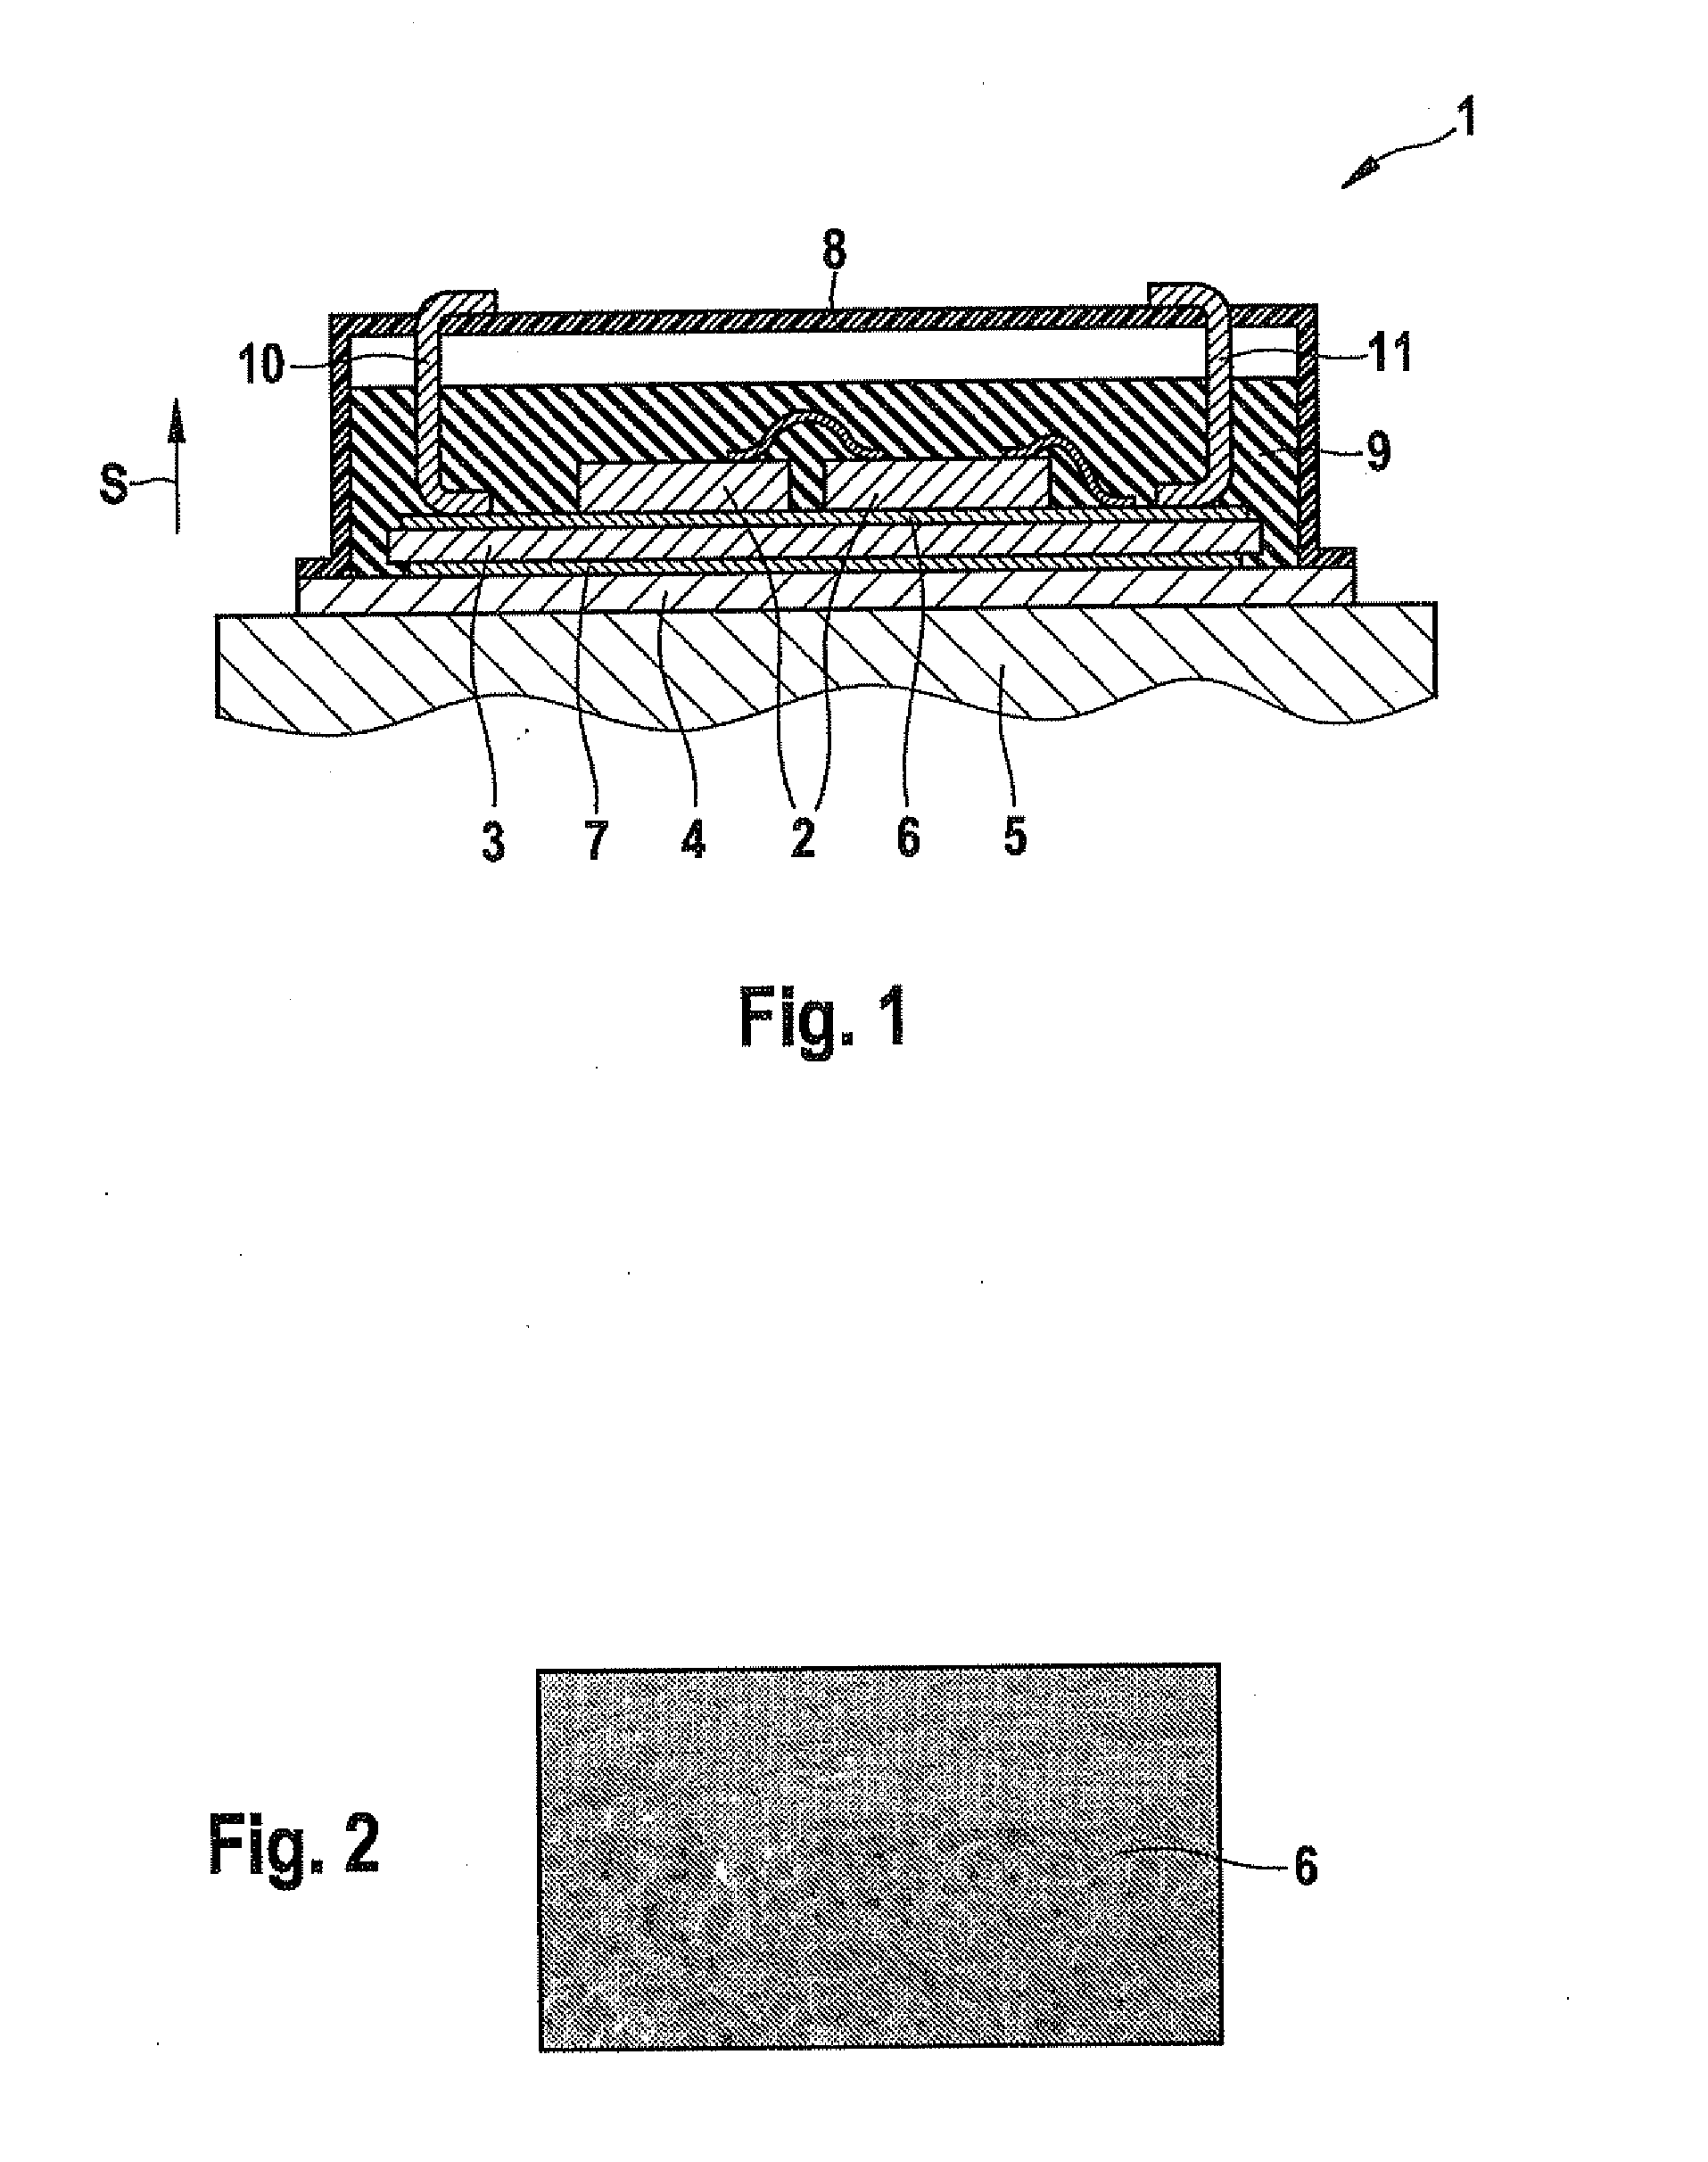 Electrical or electronic composite component and method for producing an electrical or electronic composite component